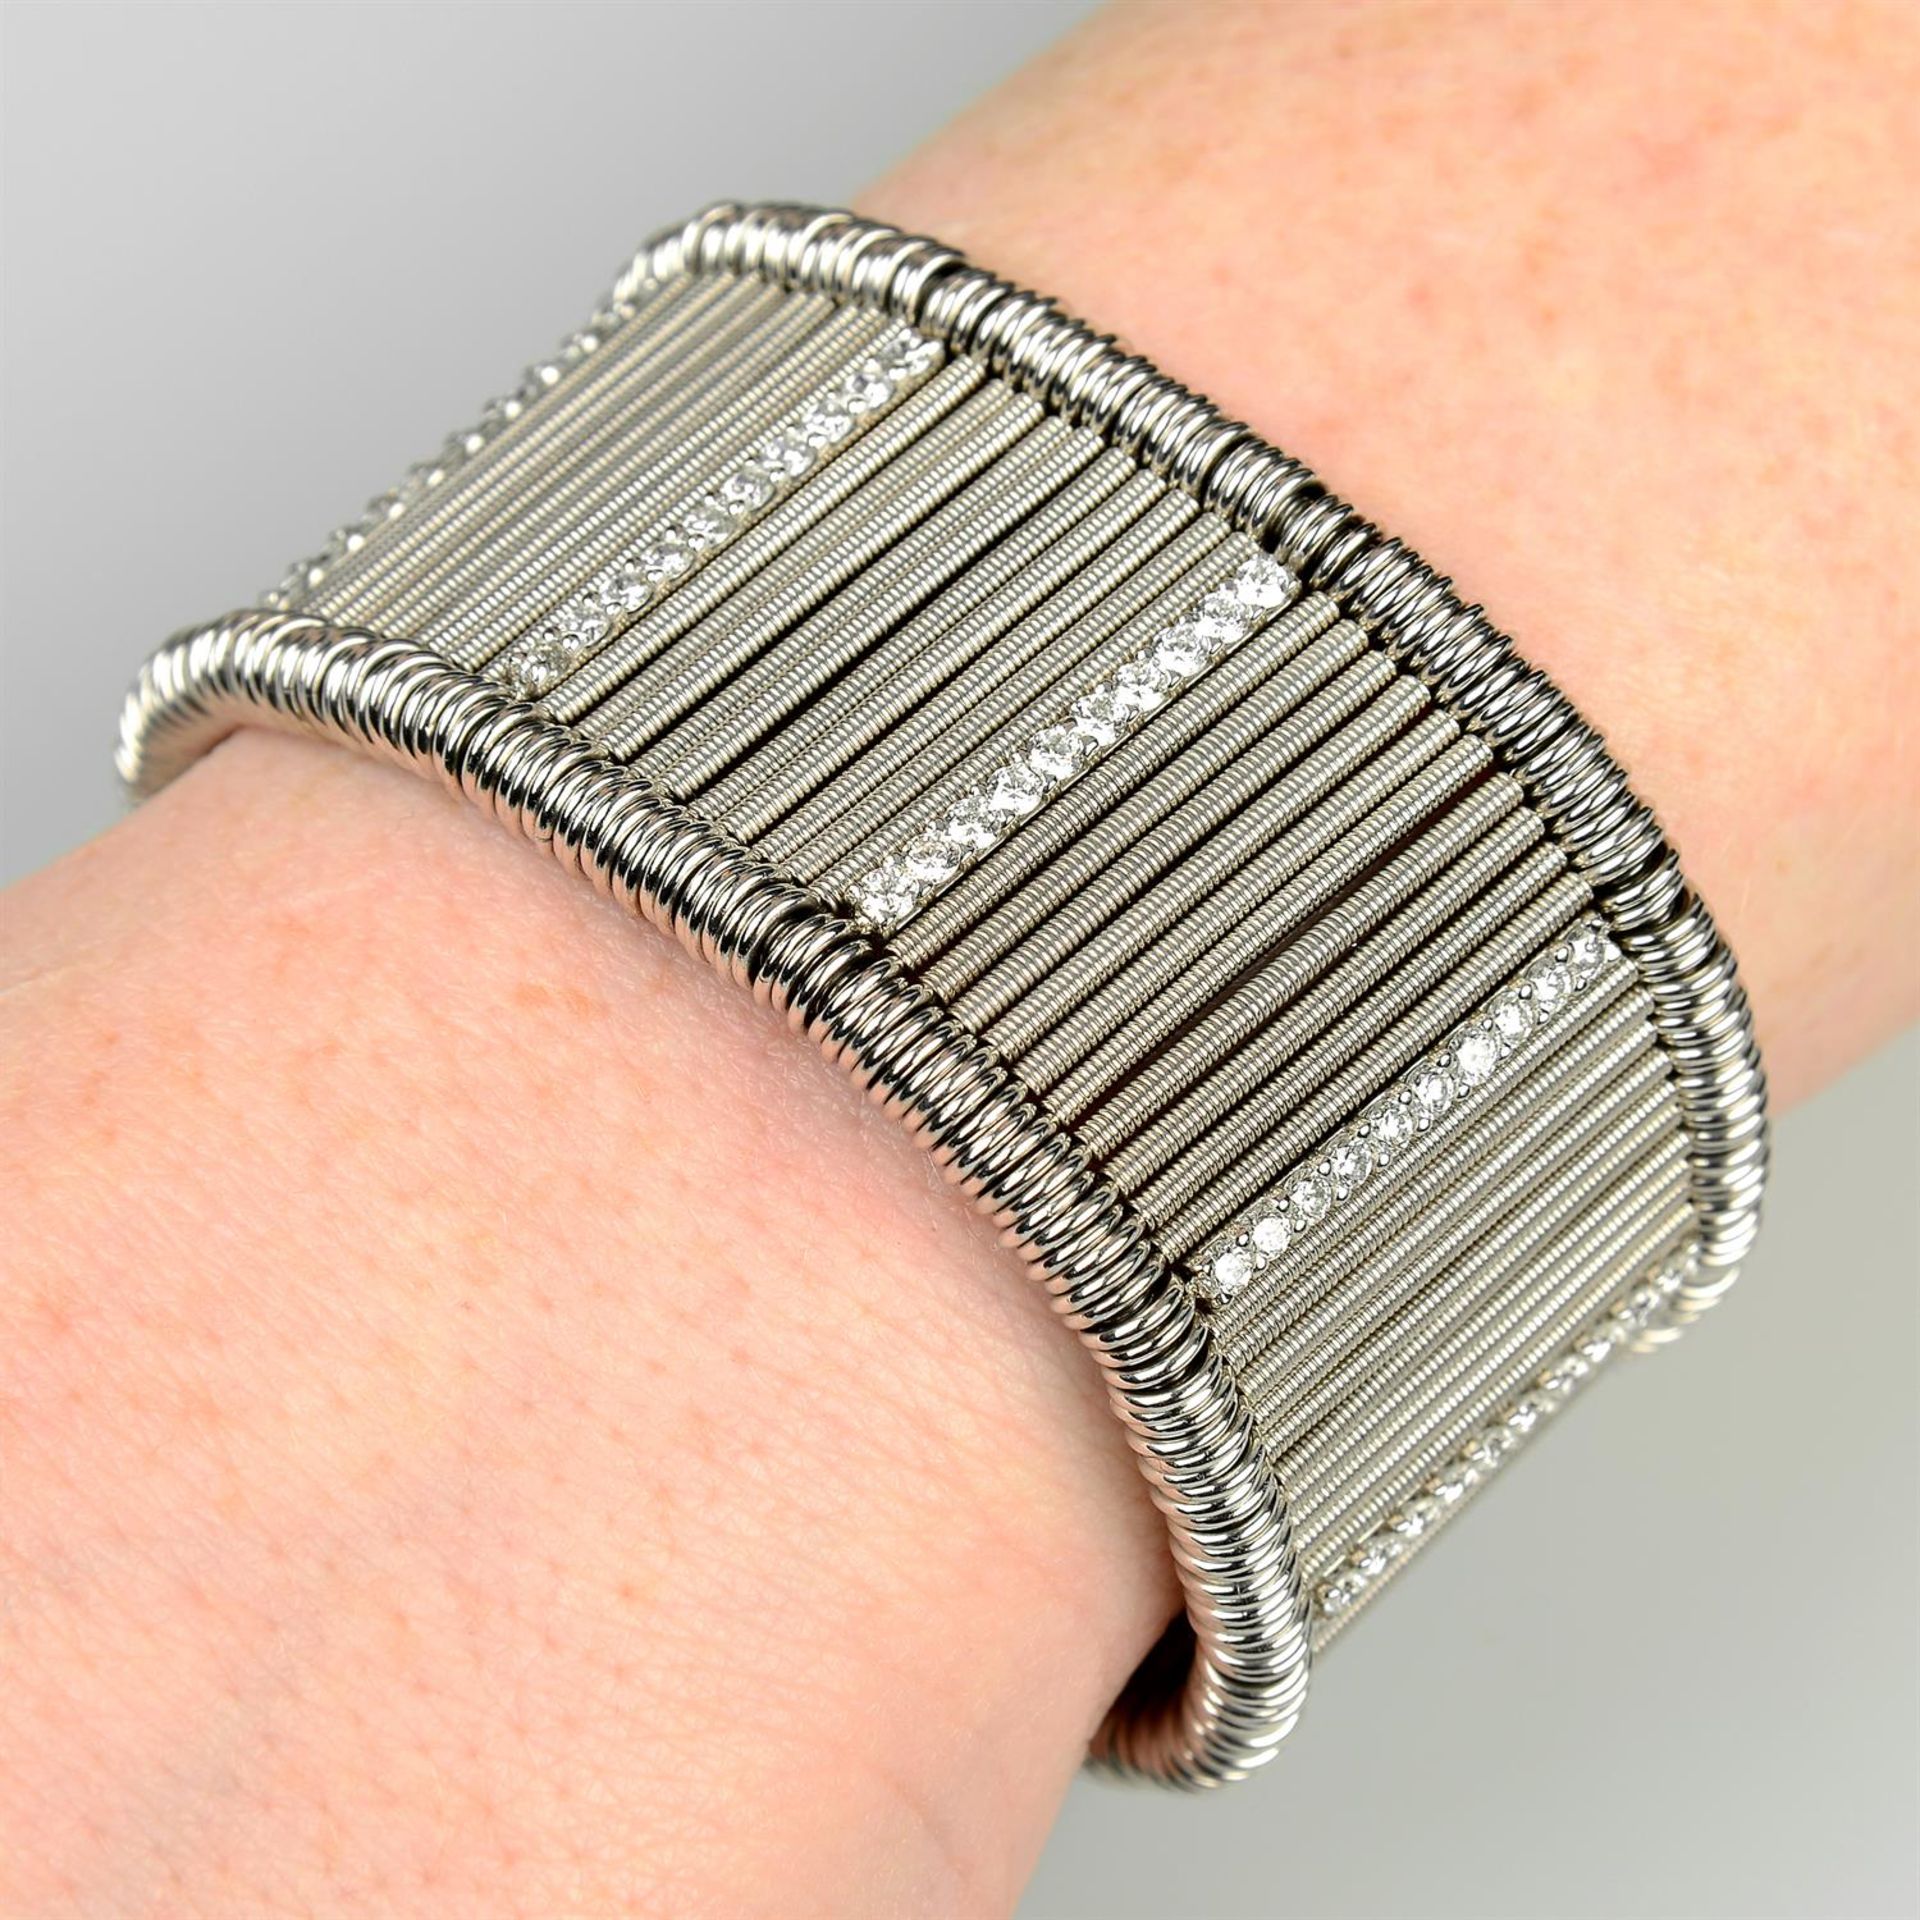 An 18ct gold, stainless steel and brilliant-cut diamond 'Shanghai' bracelet cuff, by Jarretiere.